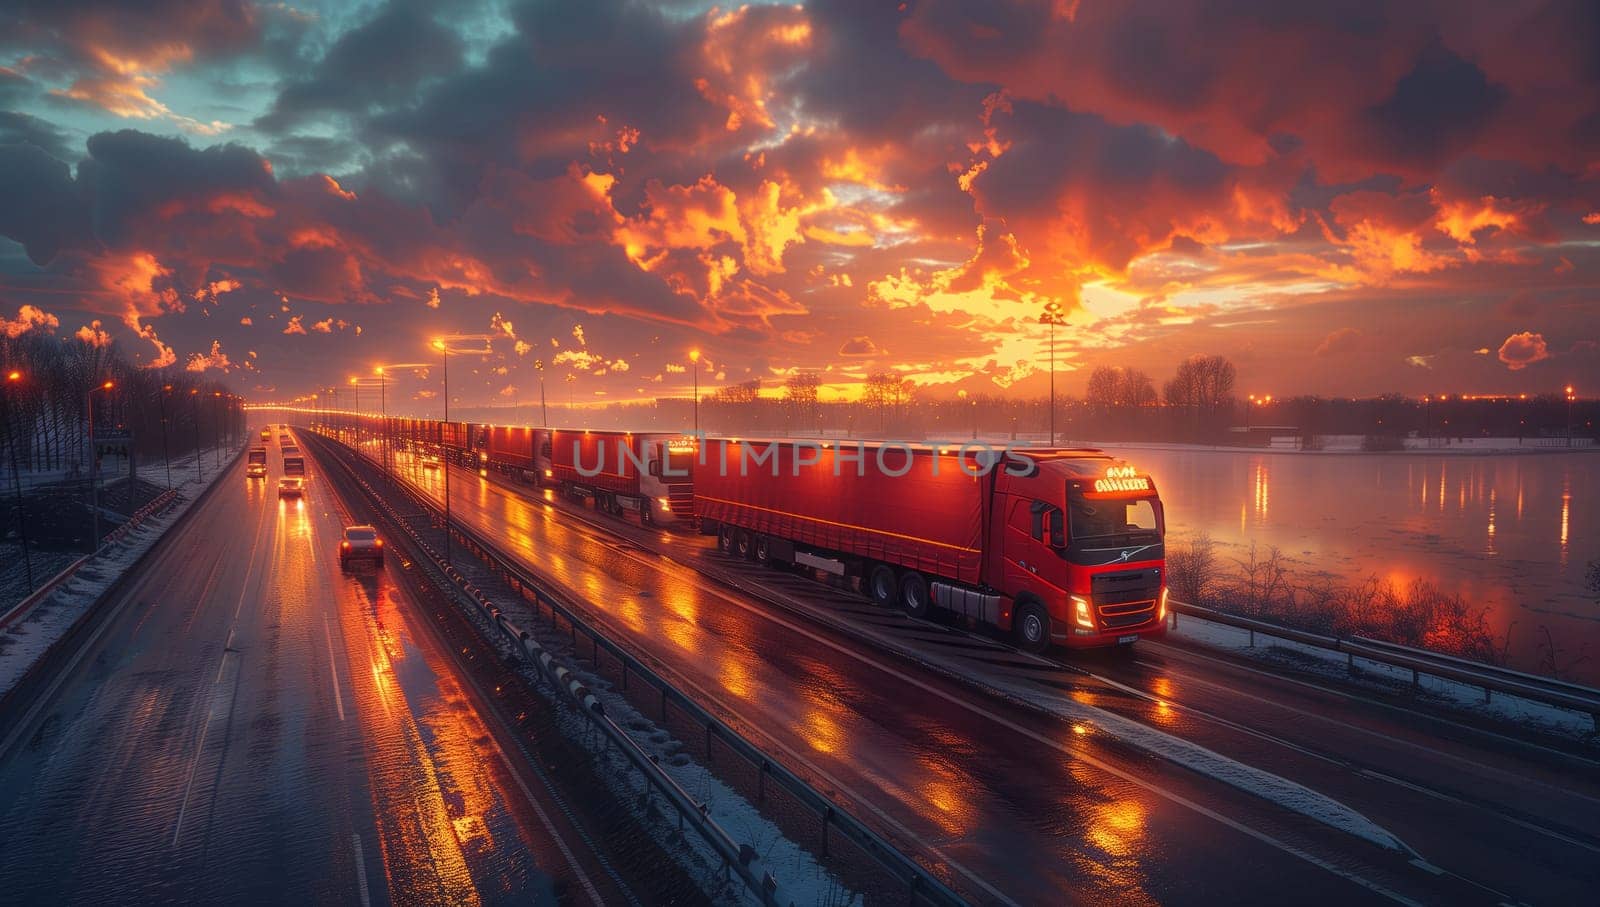 A red truck is traveling down the highway at sunset, with the sky filled with colorful clouds. The automotive lighting illuminates the asphalt as the vehicle rolls along towards dusk